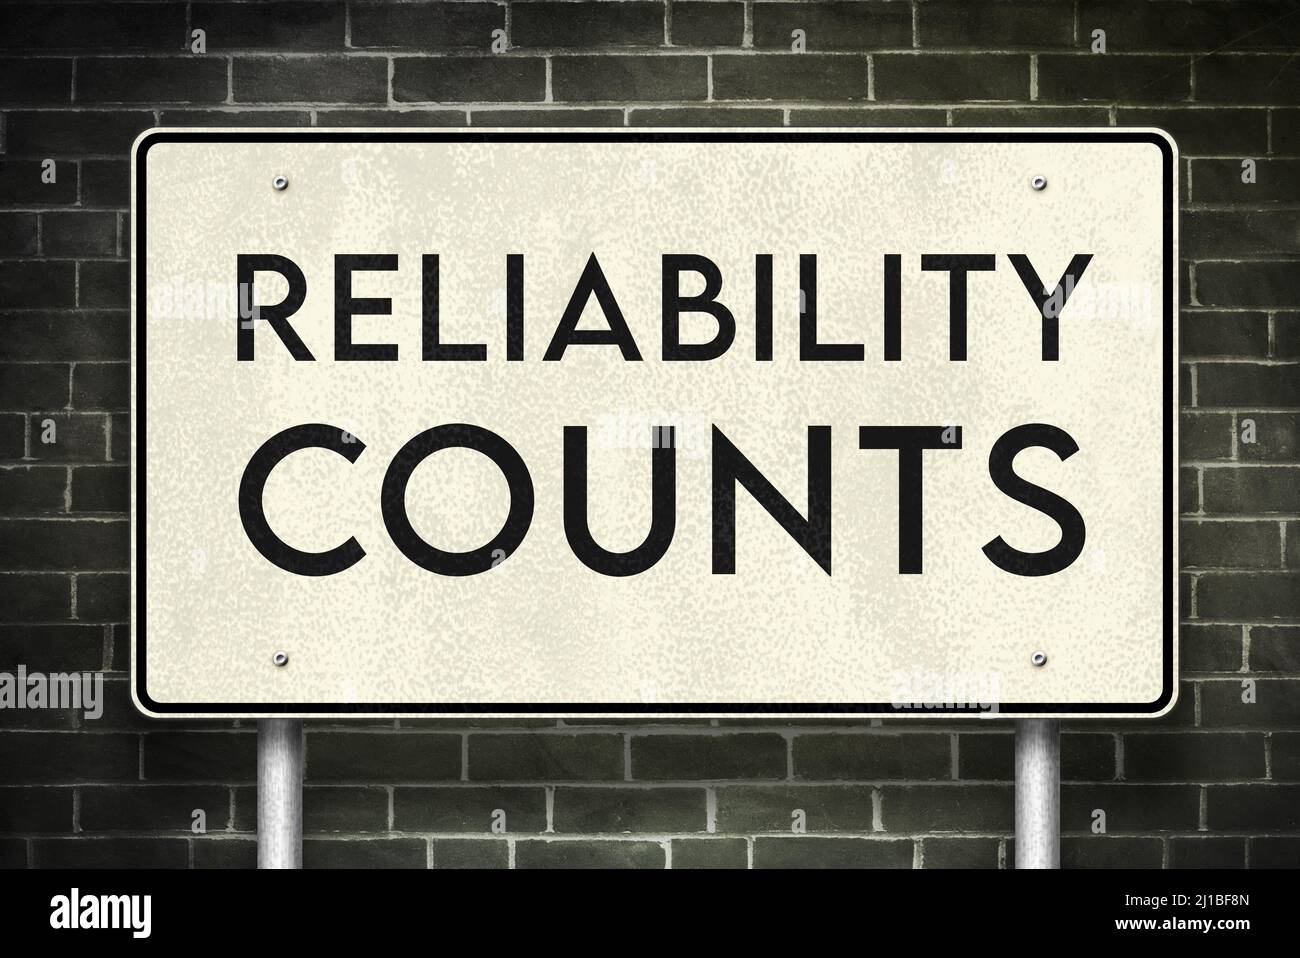 Reliability counts road sign information Stock Photo